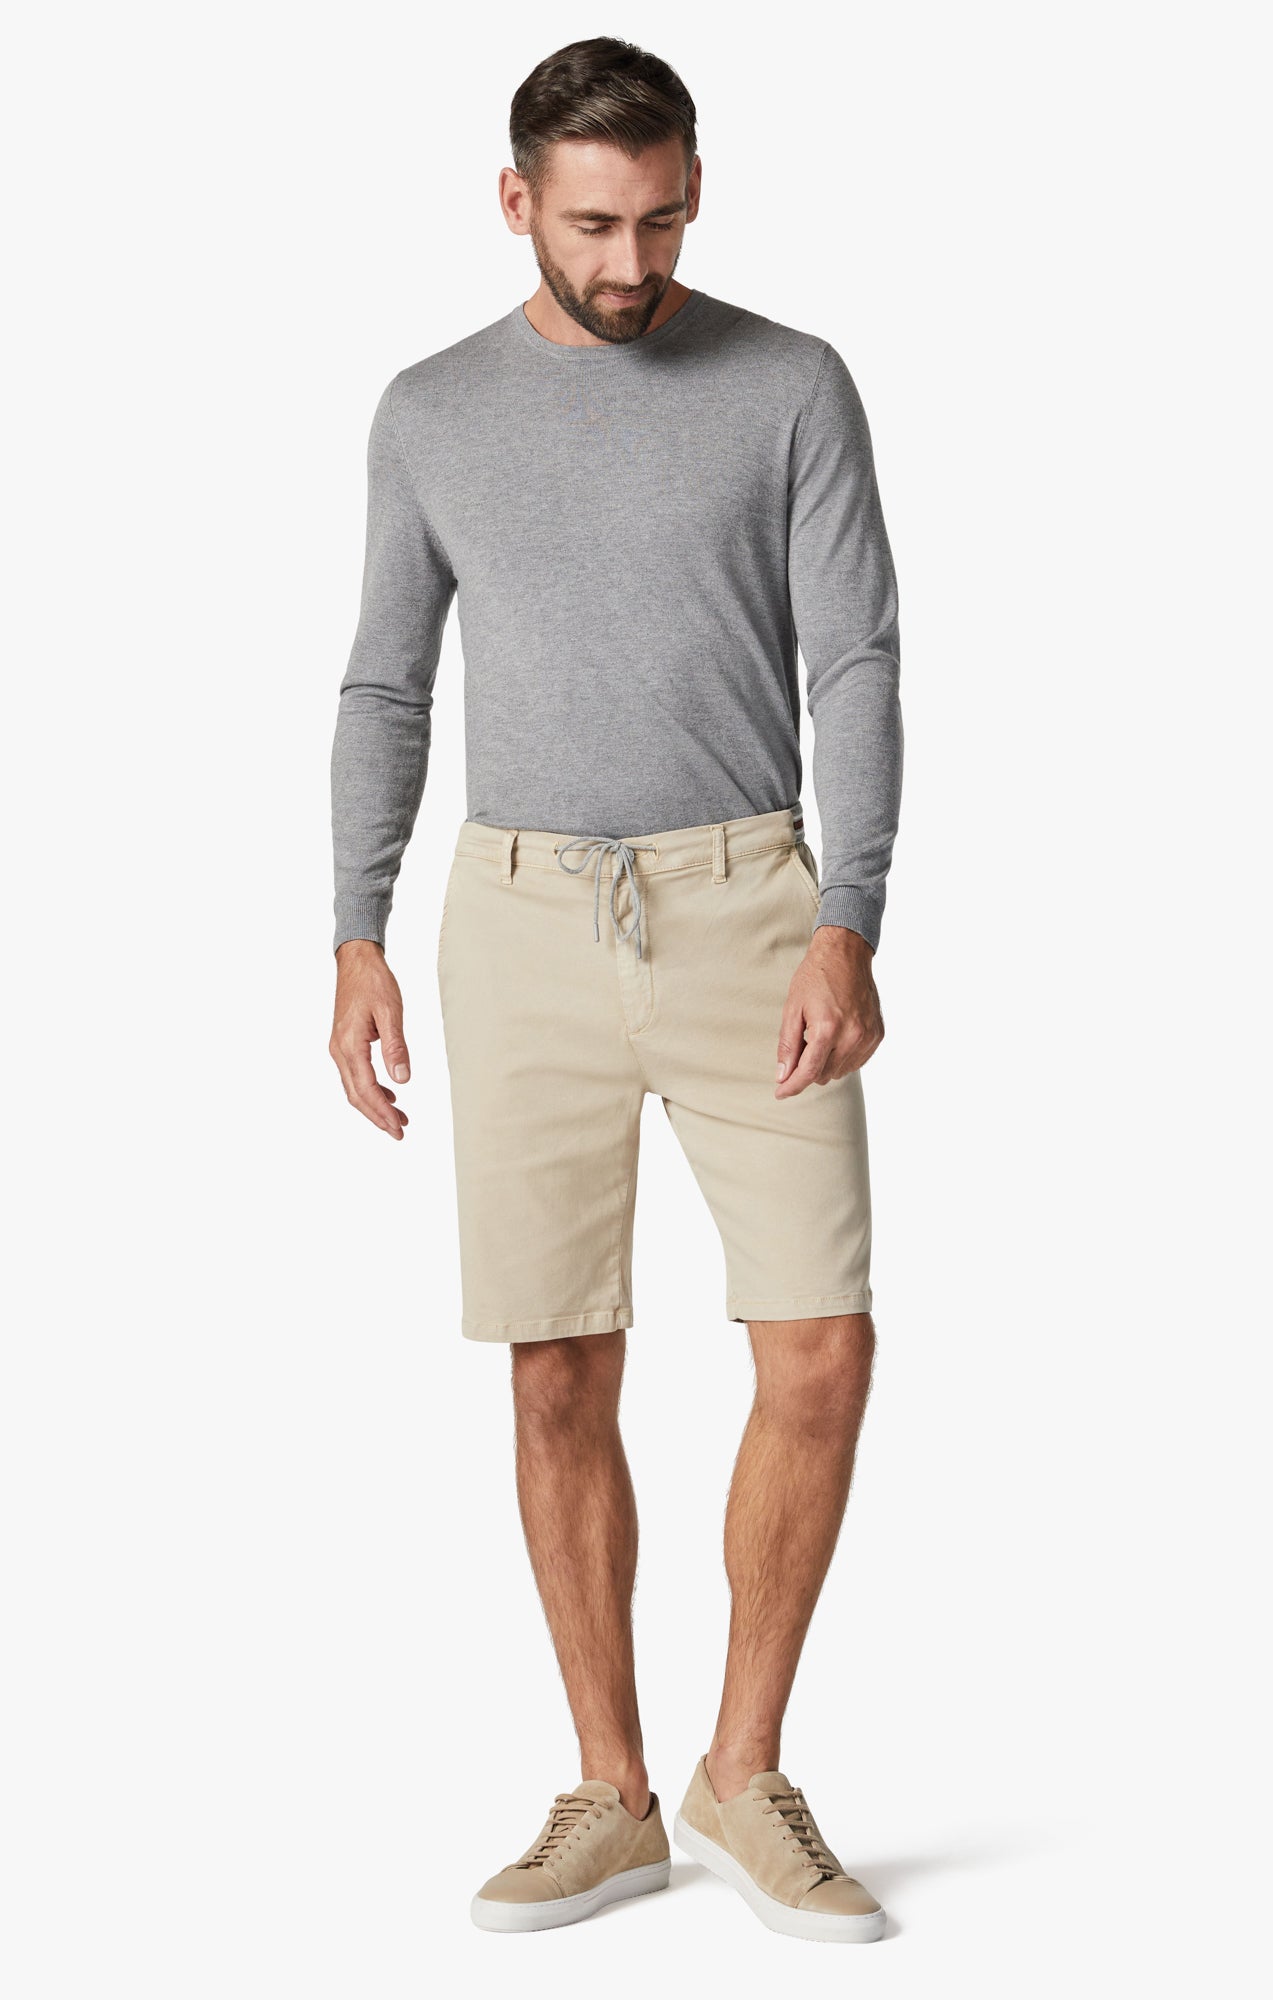 Ravenna Drawstring Shorts In Sand Soft Touch Image 1